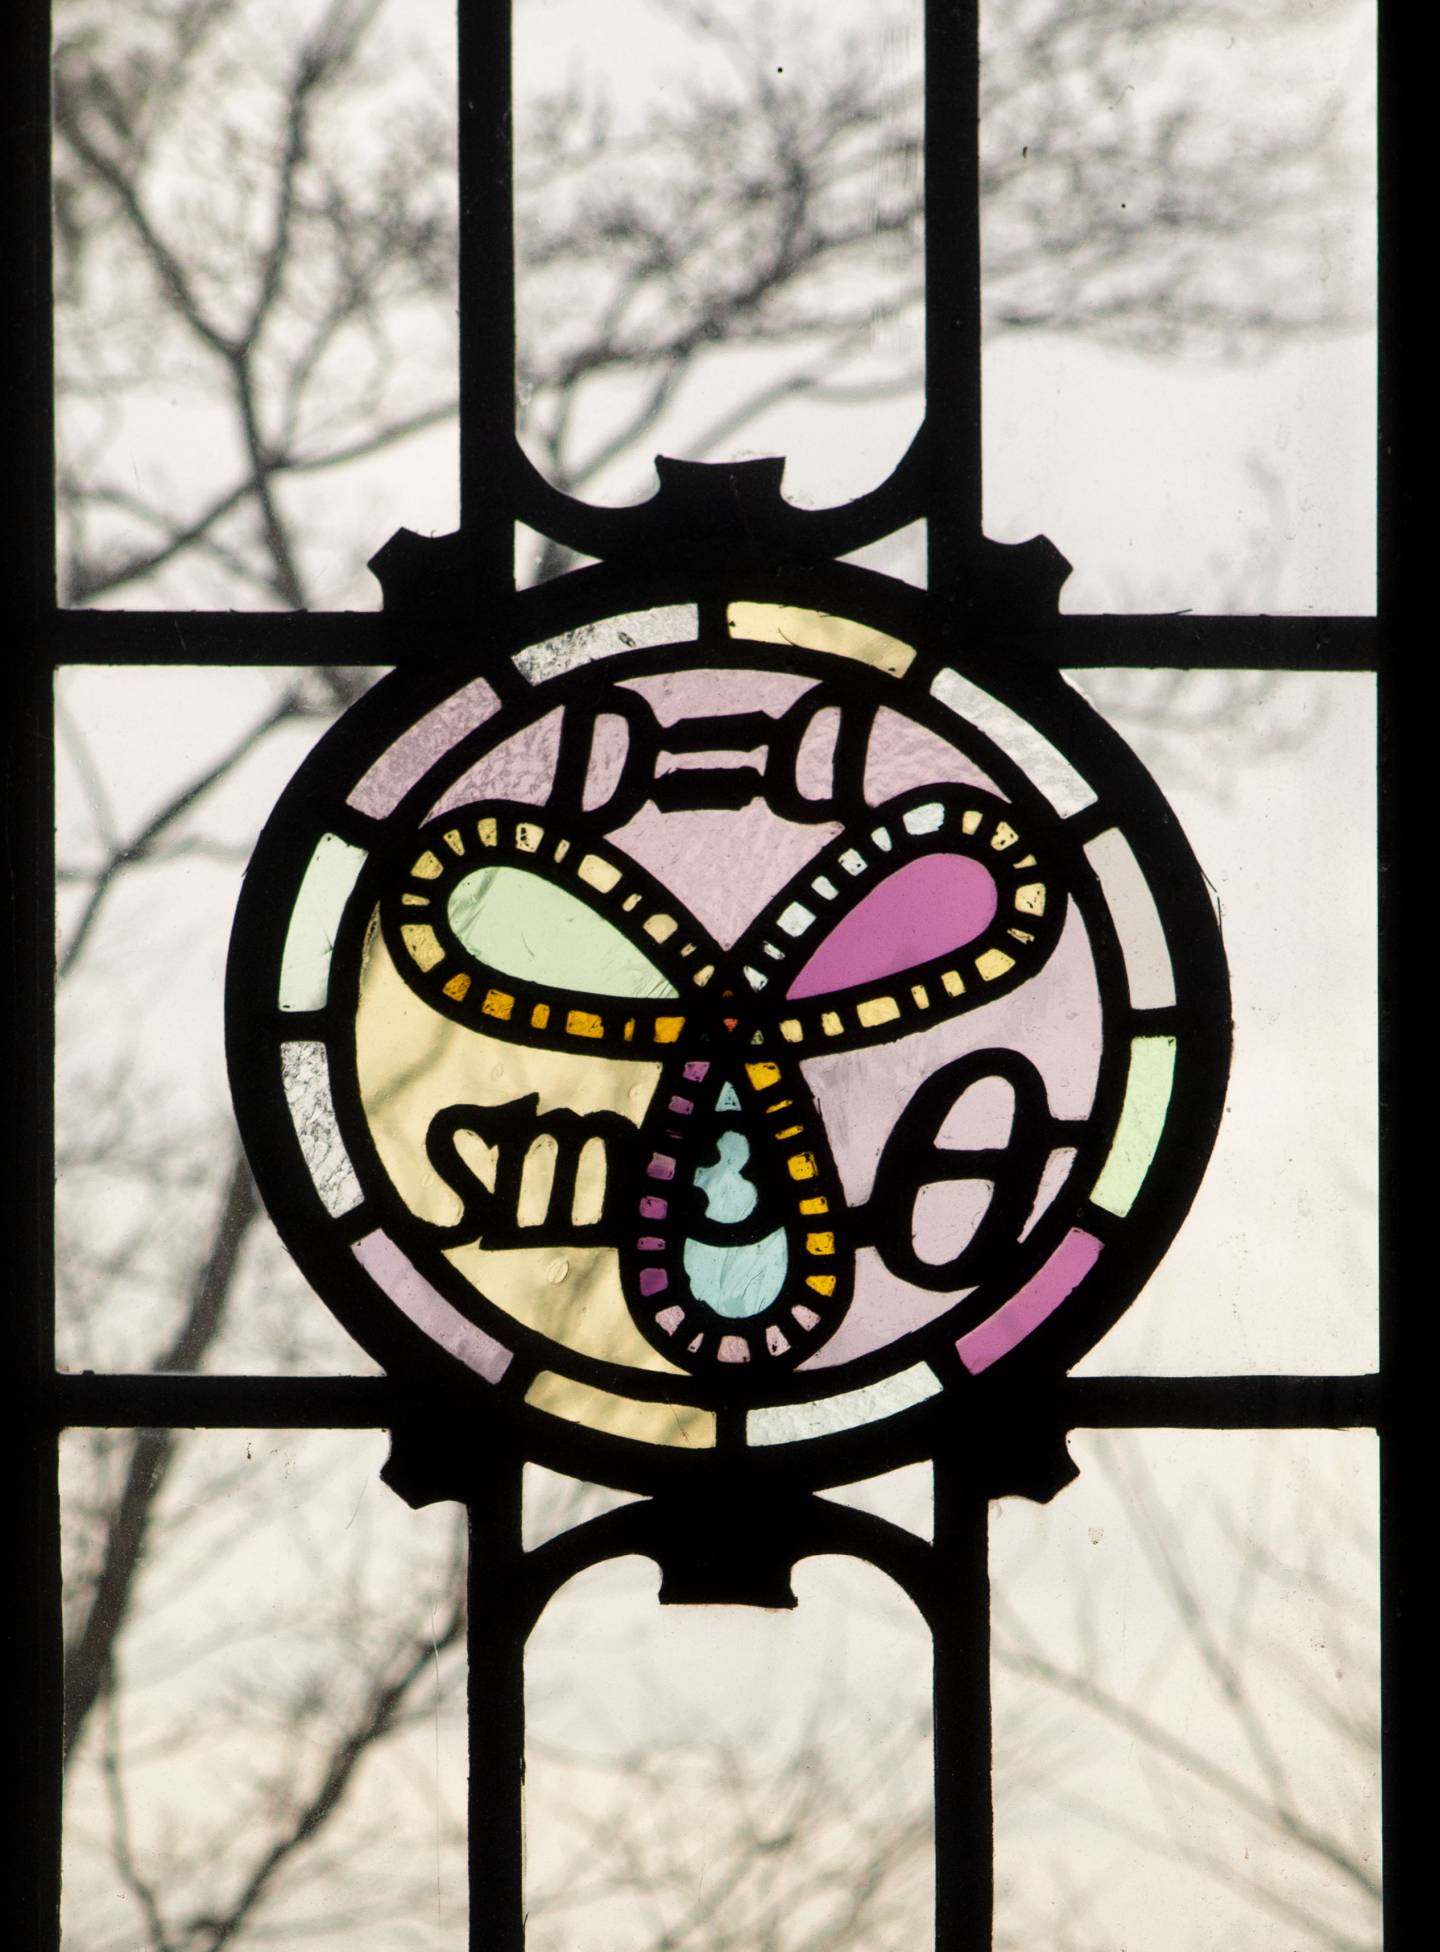 Fine Hall window with math formula in stained glass